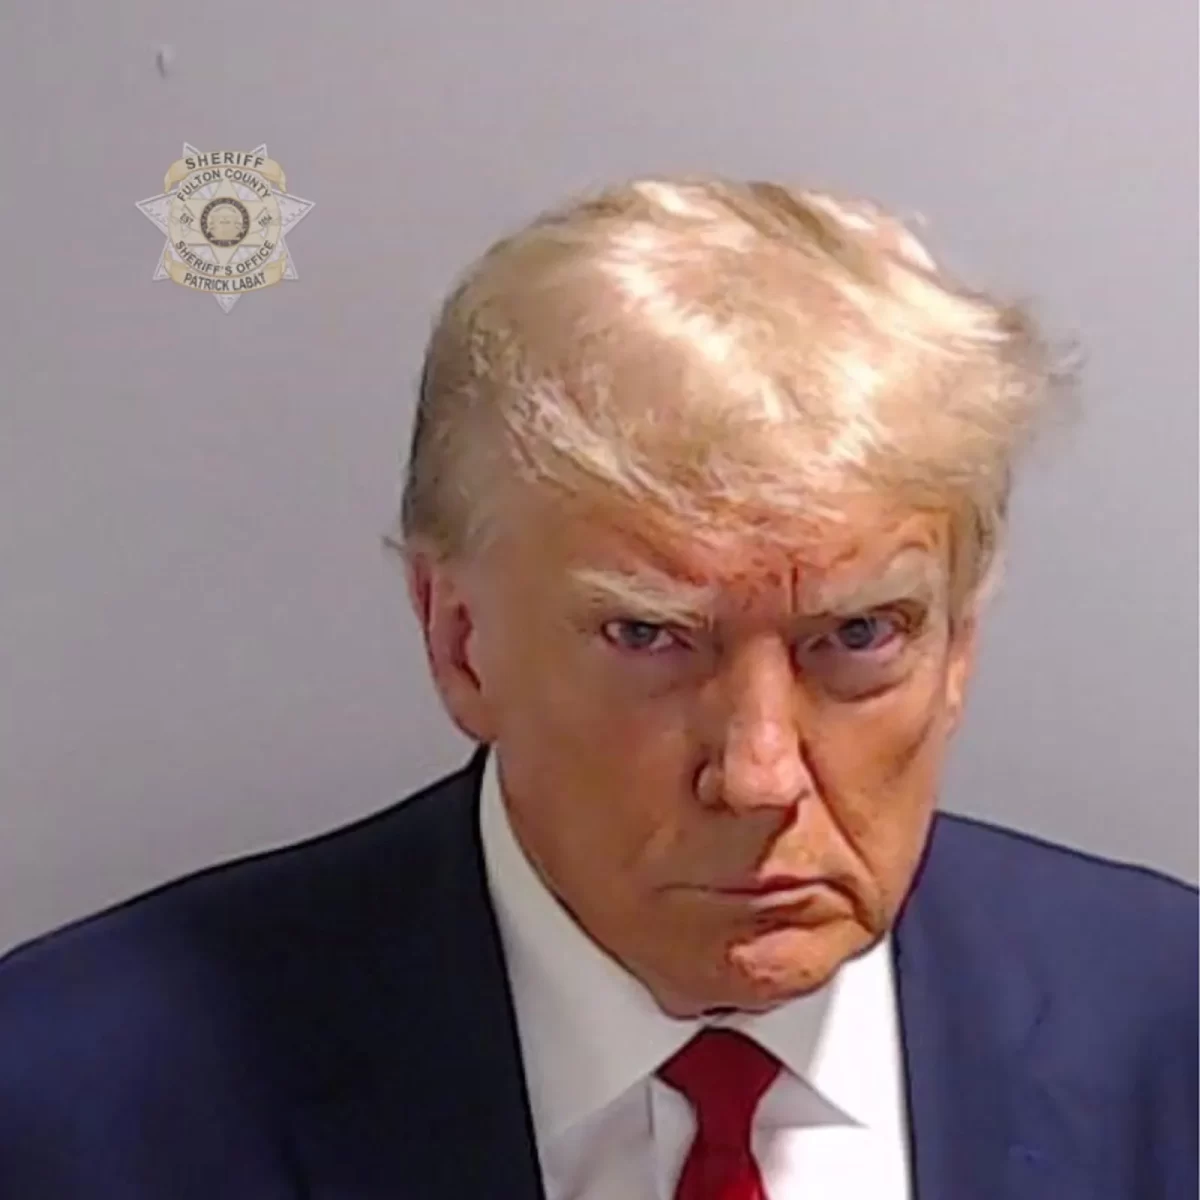 Donald+Trumps+mugshot%2C+the+first+ever+of+a+former+U.S.+president.